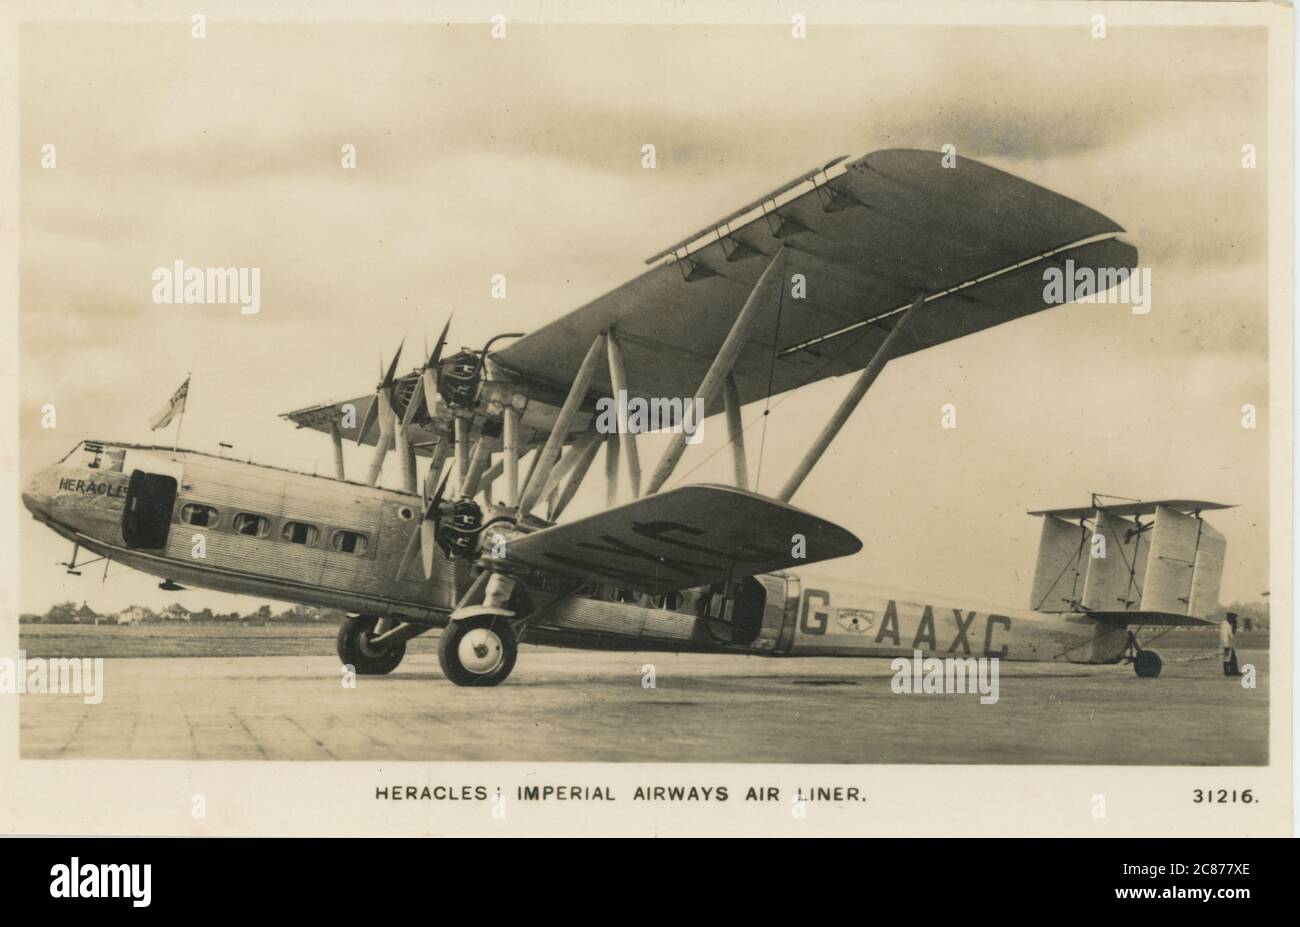 Handley Page Biplane (Heracles - Imperial Airways), Britain. Stock Photo